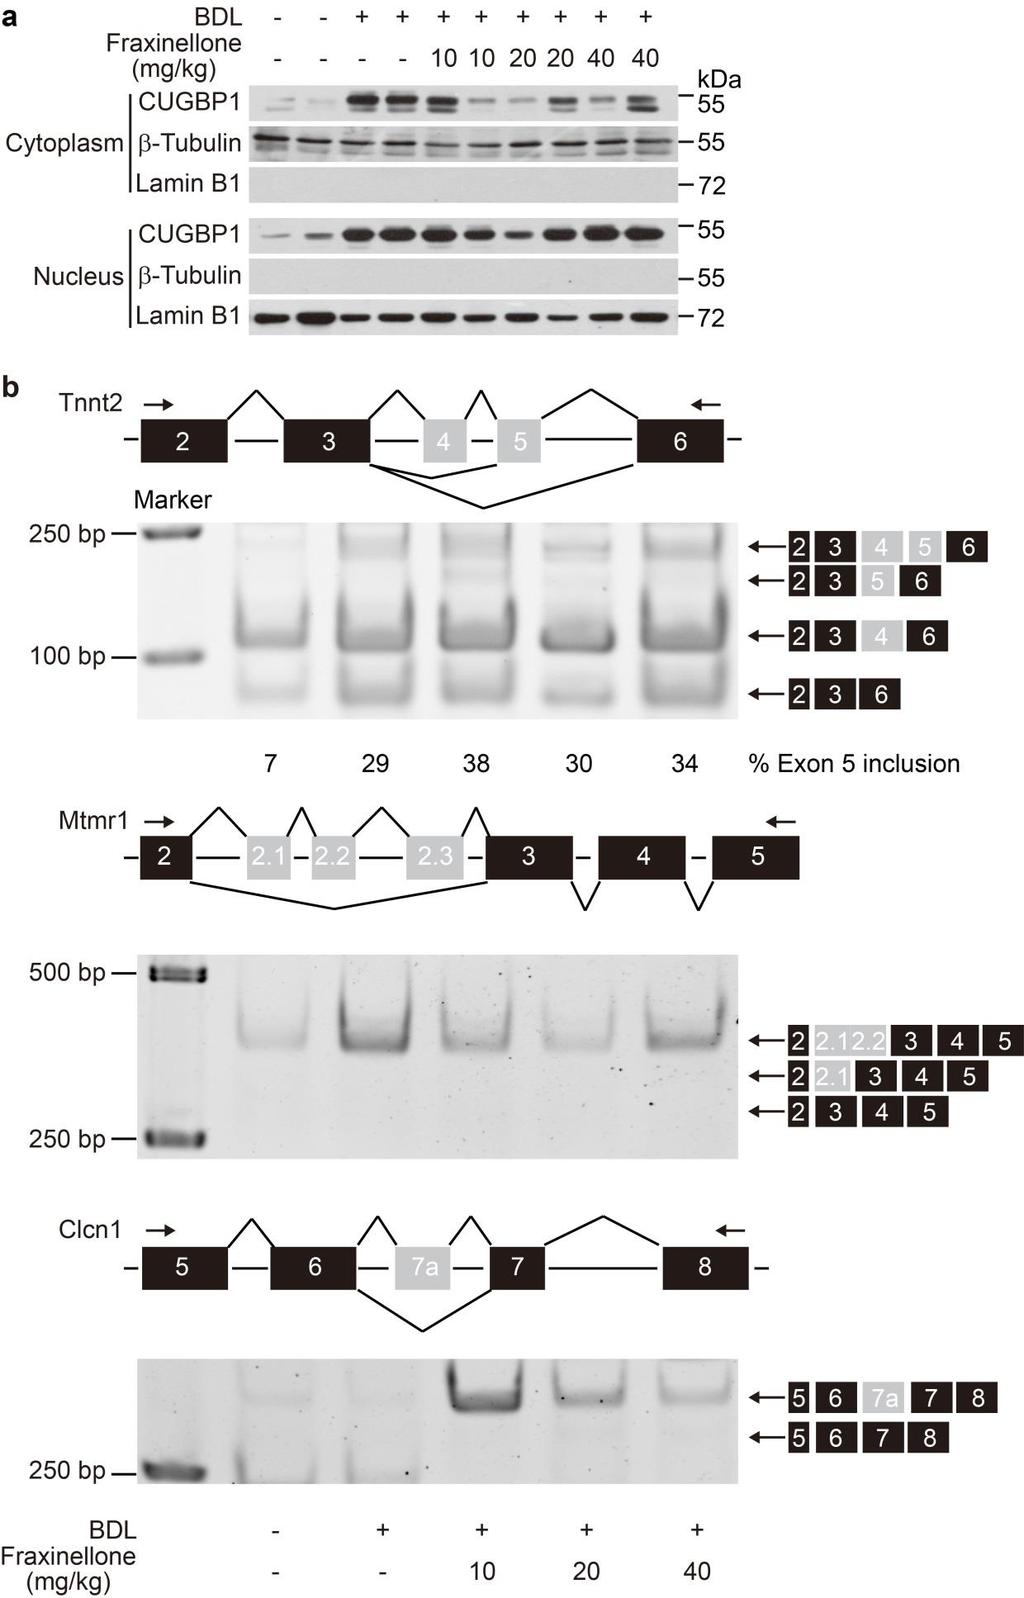 Supplementary Figure 5. Splicing pattern of CUGBP1 related genes in fibrotic liver.